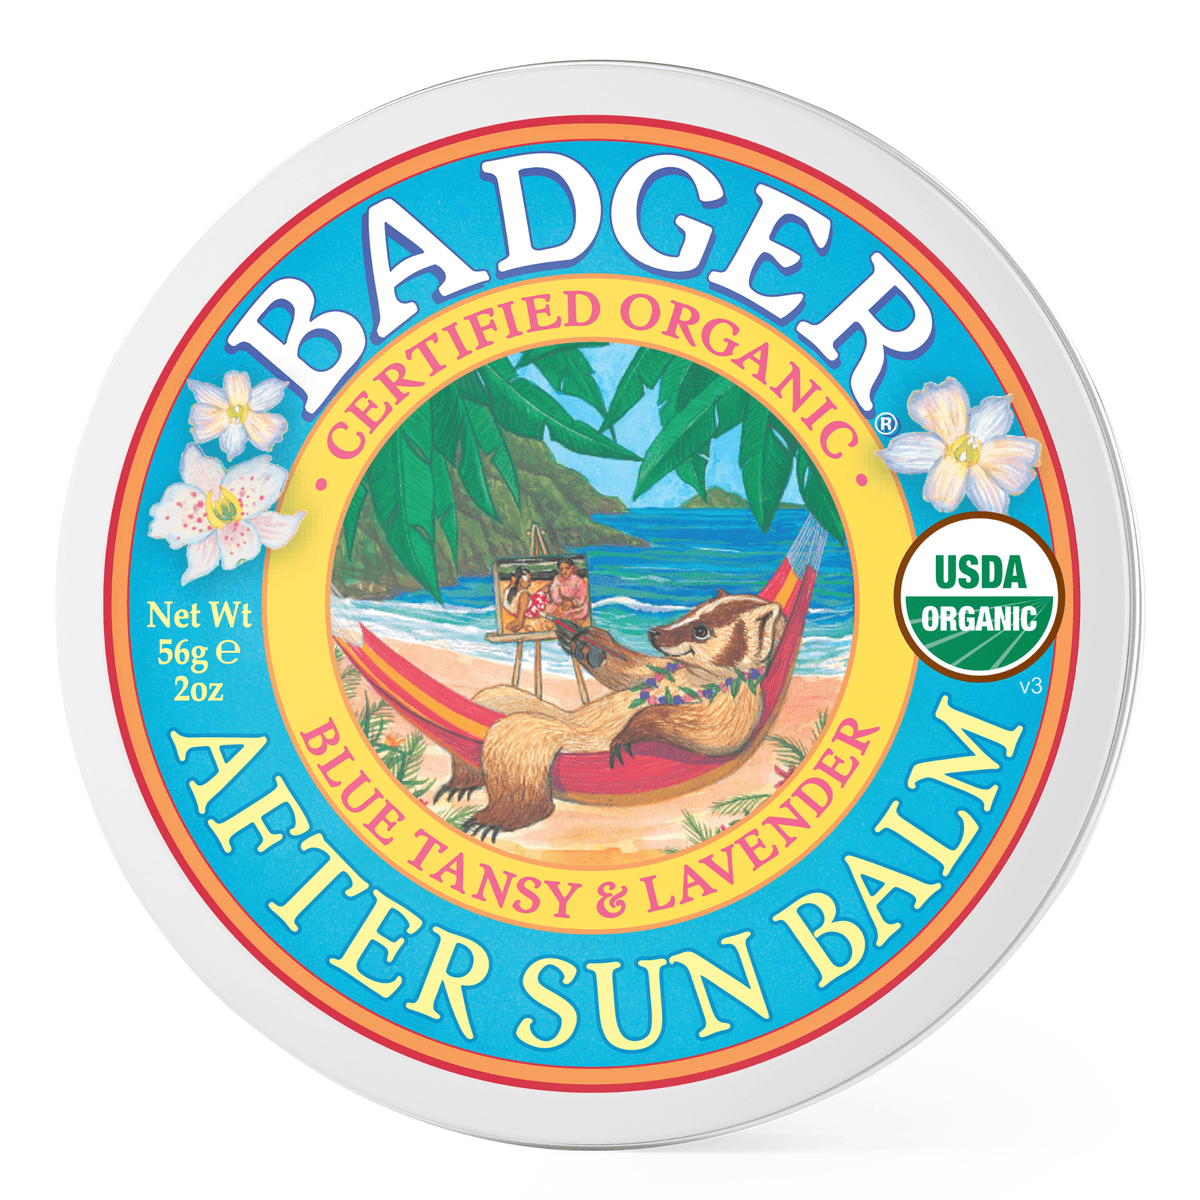 Primary Image of After Sun Balm